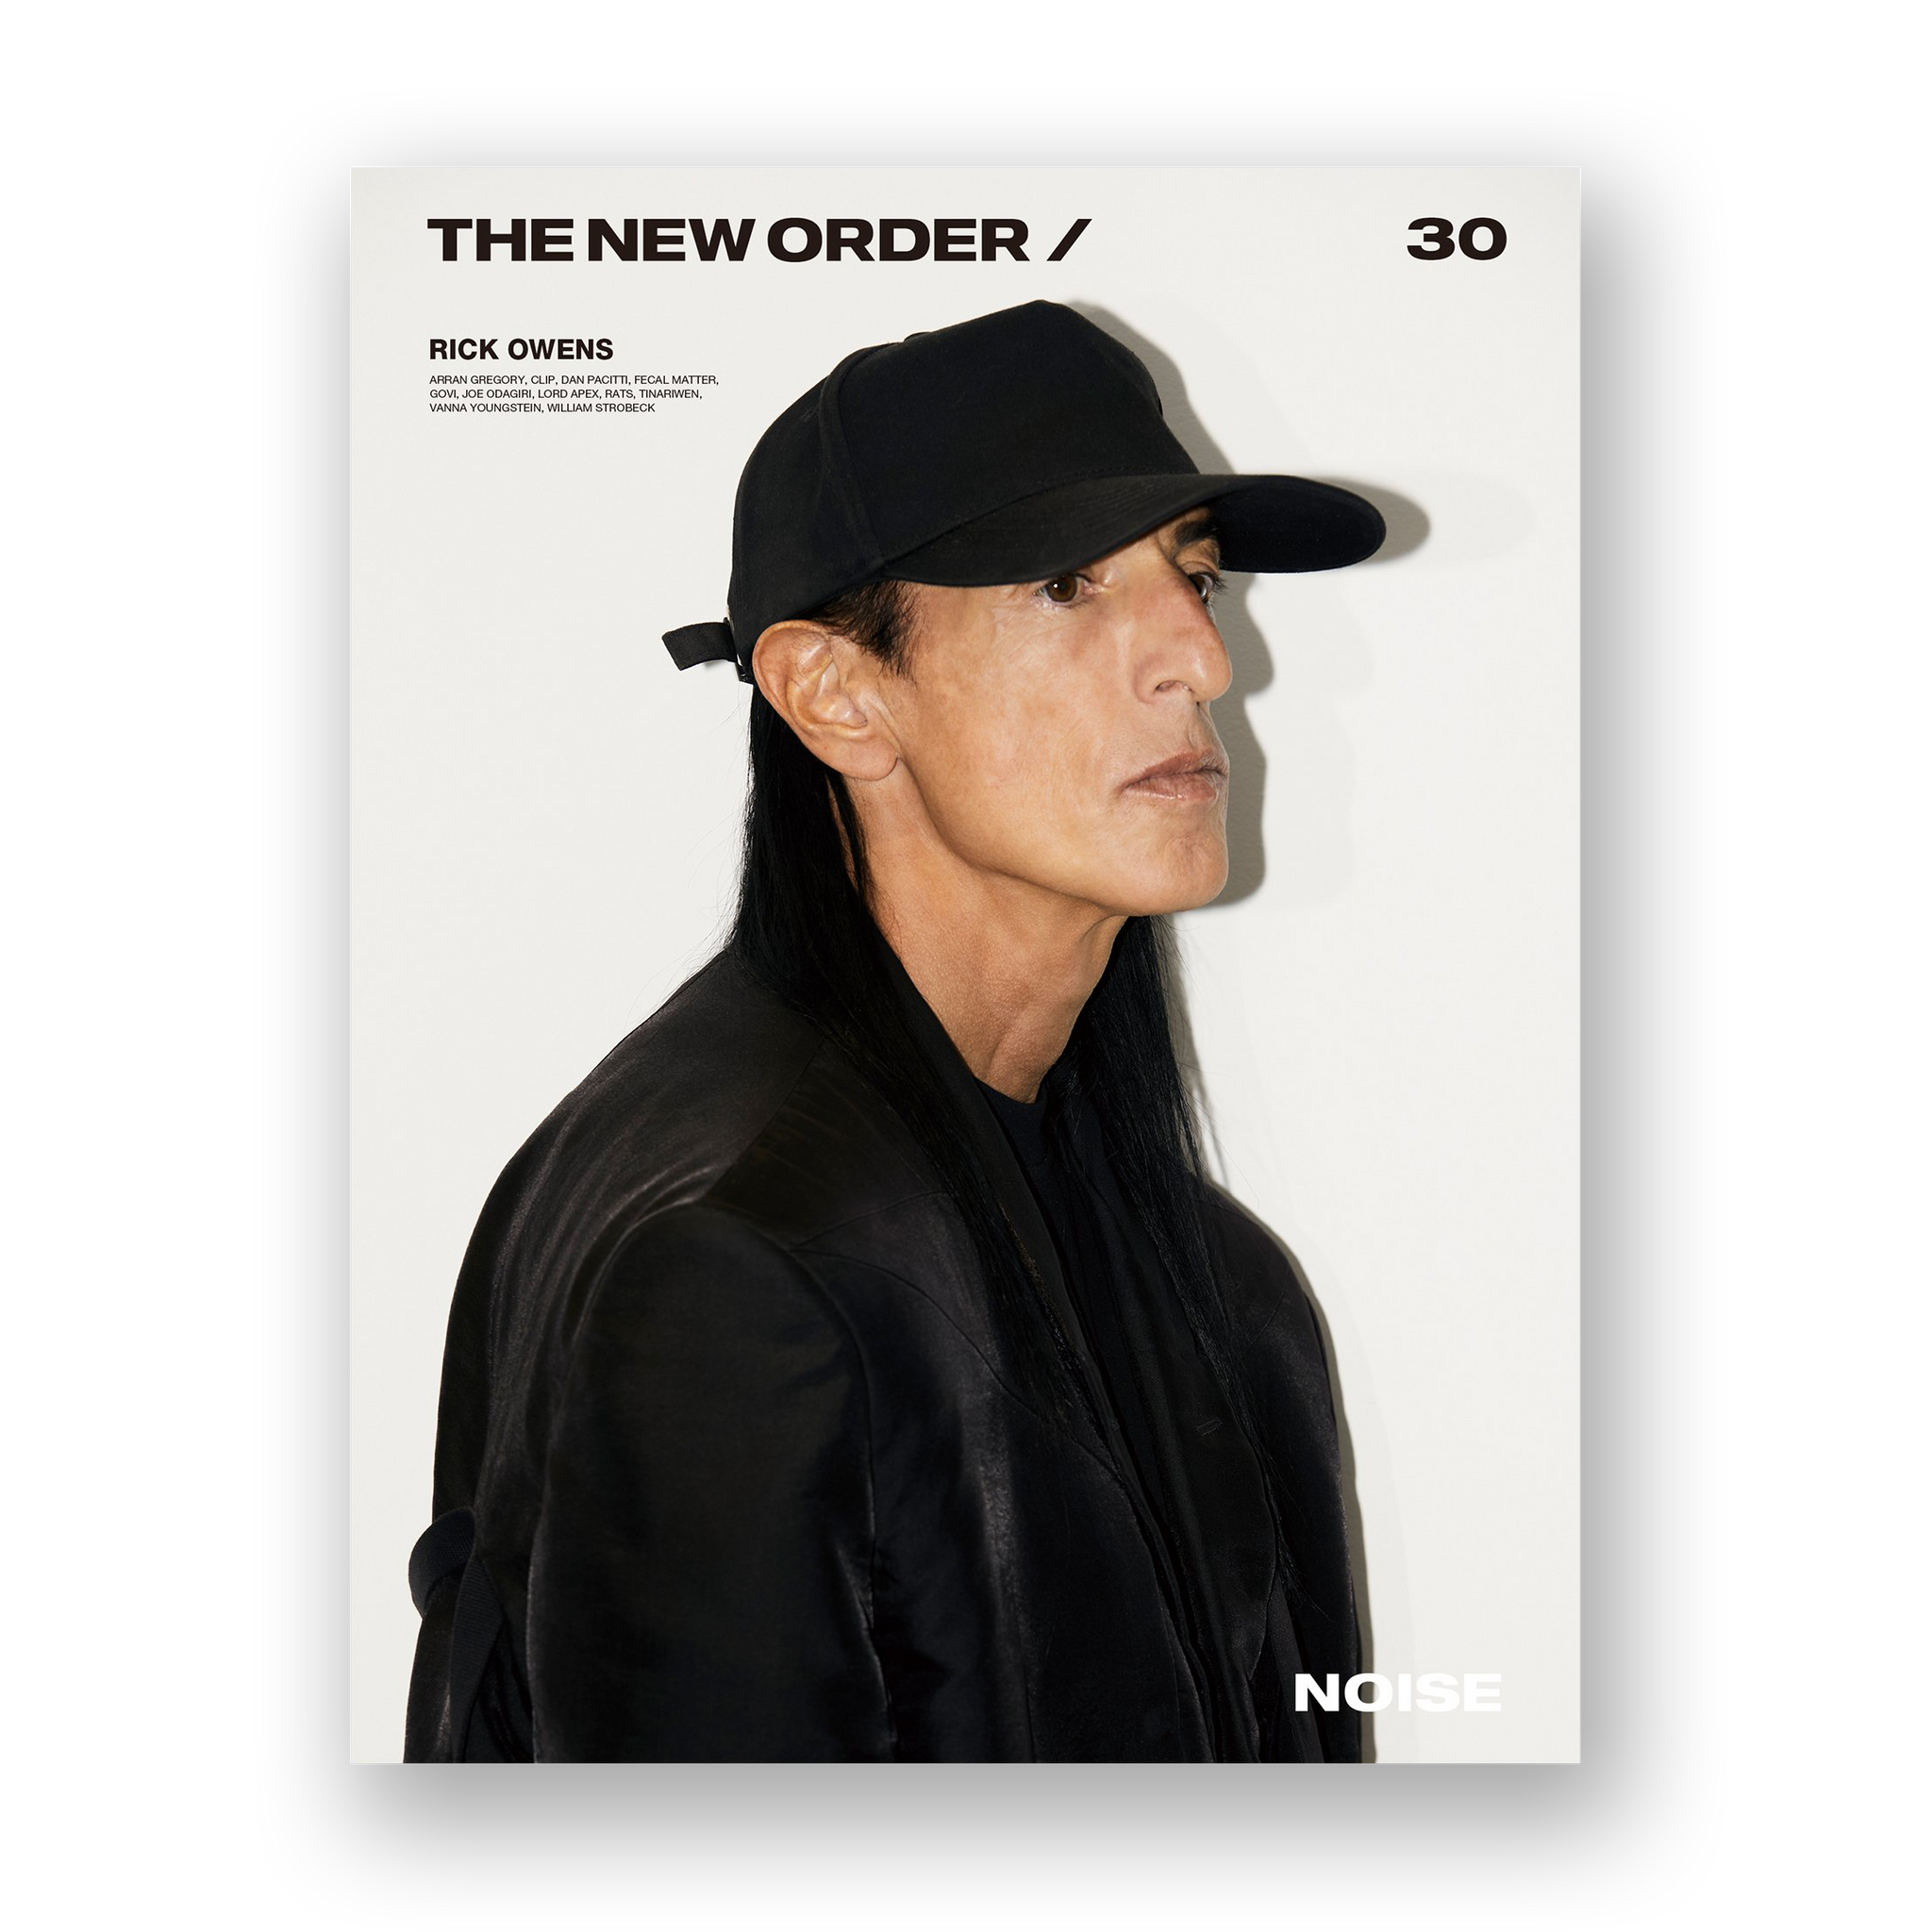 THE NEW ORDER ISSUE 30